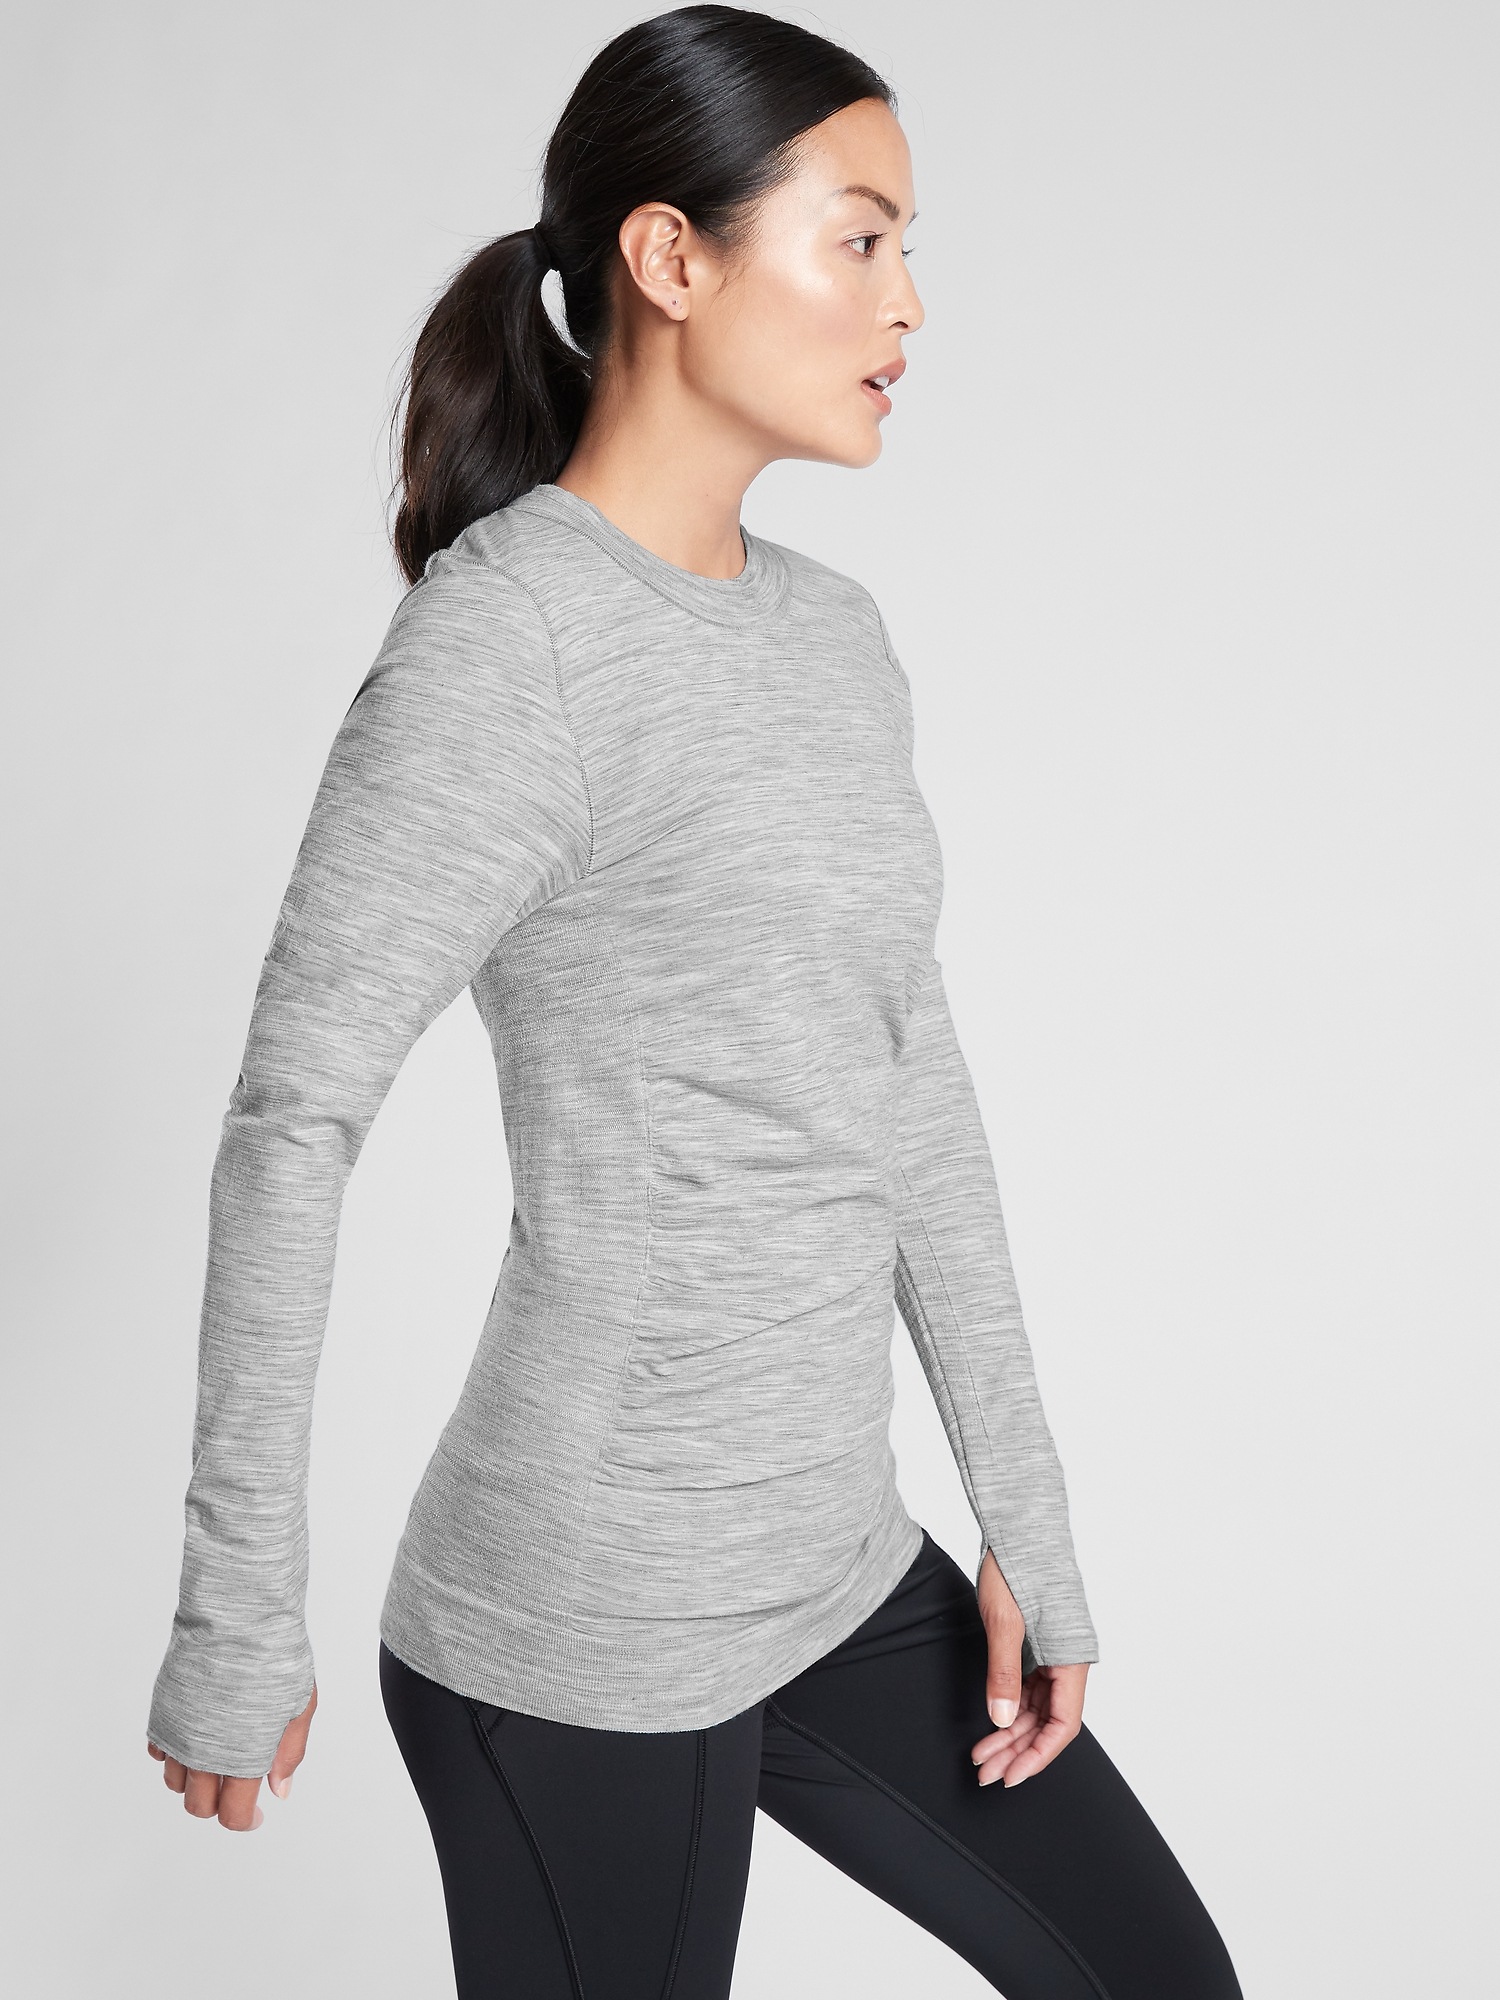 NWOT ATHLETA FORESTHILL MERINO ASCENT TOP LONG SLEEVE SMALL $74 TOP 